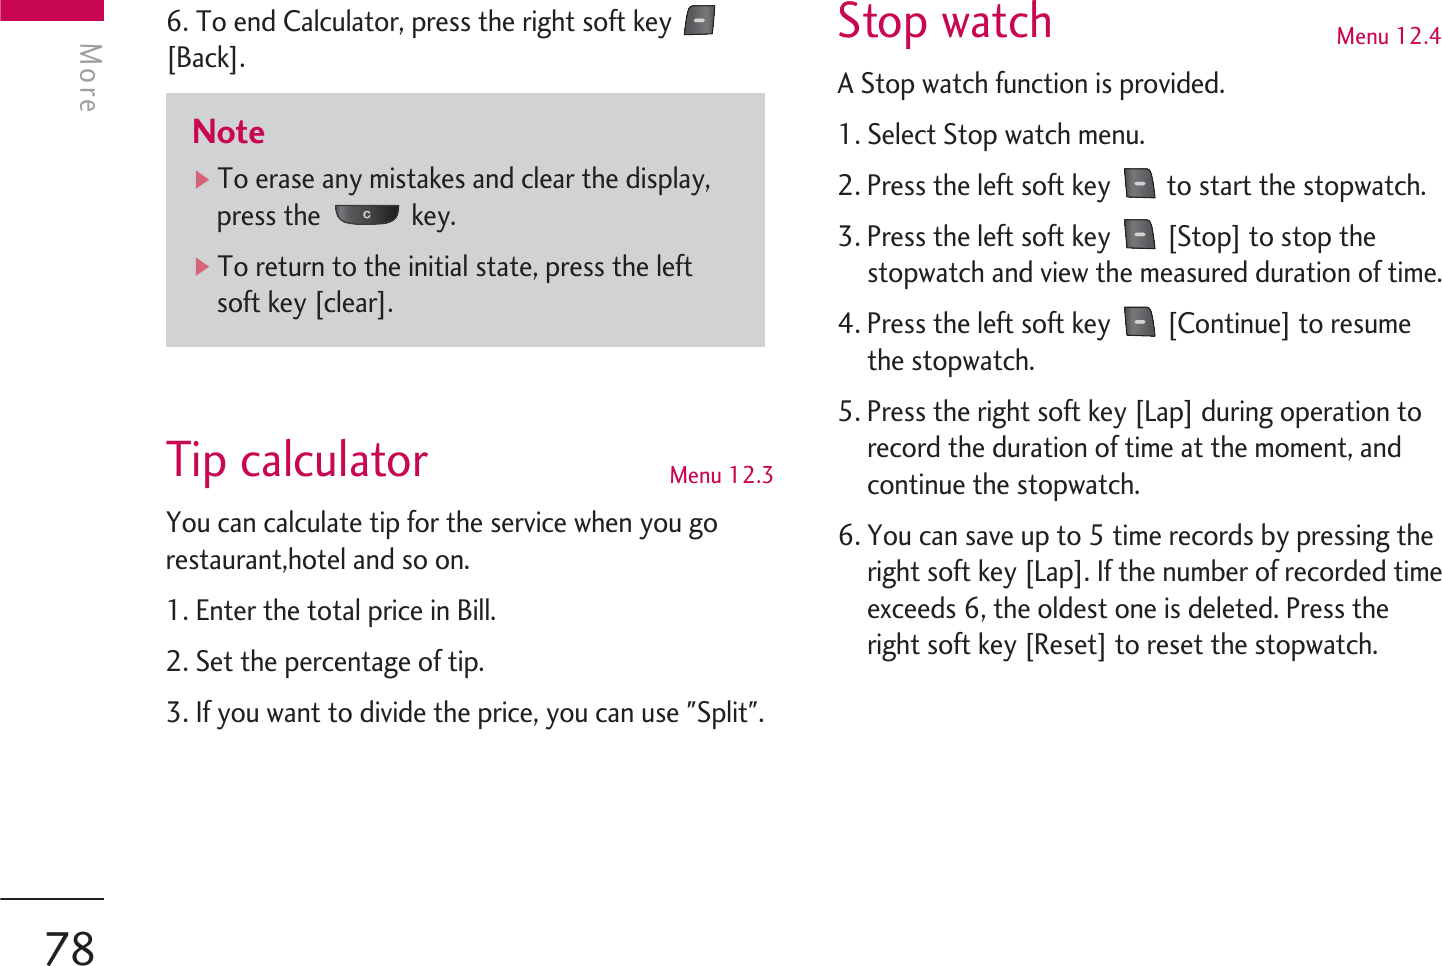 6. To end Calculator, press the right soft key [Back].Tip calculator Menu 12.3You can calculate tip for the service when you gorestaurant,hotel and so on.1. Enter the total price in Bill.2. Set the percentage of tip.3. If you want to divide the price, you can use &quot;Split&quot;.Stop watch Menu 12.4A Stop watch function is provided.1. Select Stop watch menu.2. Press the left soft key  to start the stopwatch.3. Press the left soft key  [Stop] to stop thestopwatch and view the measured duration of time.4. Press the left soft key  [Continue] to resumethe stopwatch.5. Press the right soft key [Lap] during operation torecord the duration of time at the moment, andcontinue the stopwatch.6. You can save up to 5 time records by pressing theright soft key [Lap]. If the number of recorded timeexceeds 6, the oldest one is deleted. Press theright soft key [Reset] to reset the stopwatch.MoreMore78Note]To erase any mistakes and clear the display,press the  key.]To return to the initial state, press the leftsoft key [clear].